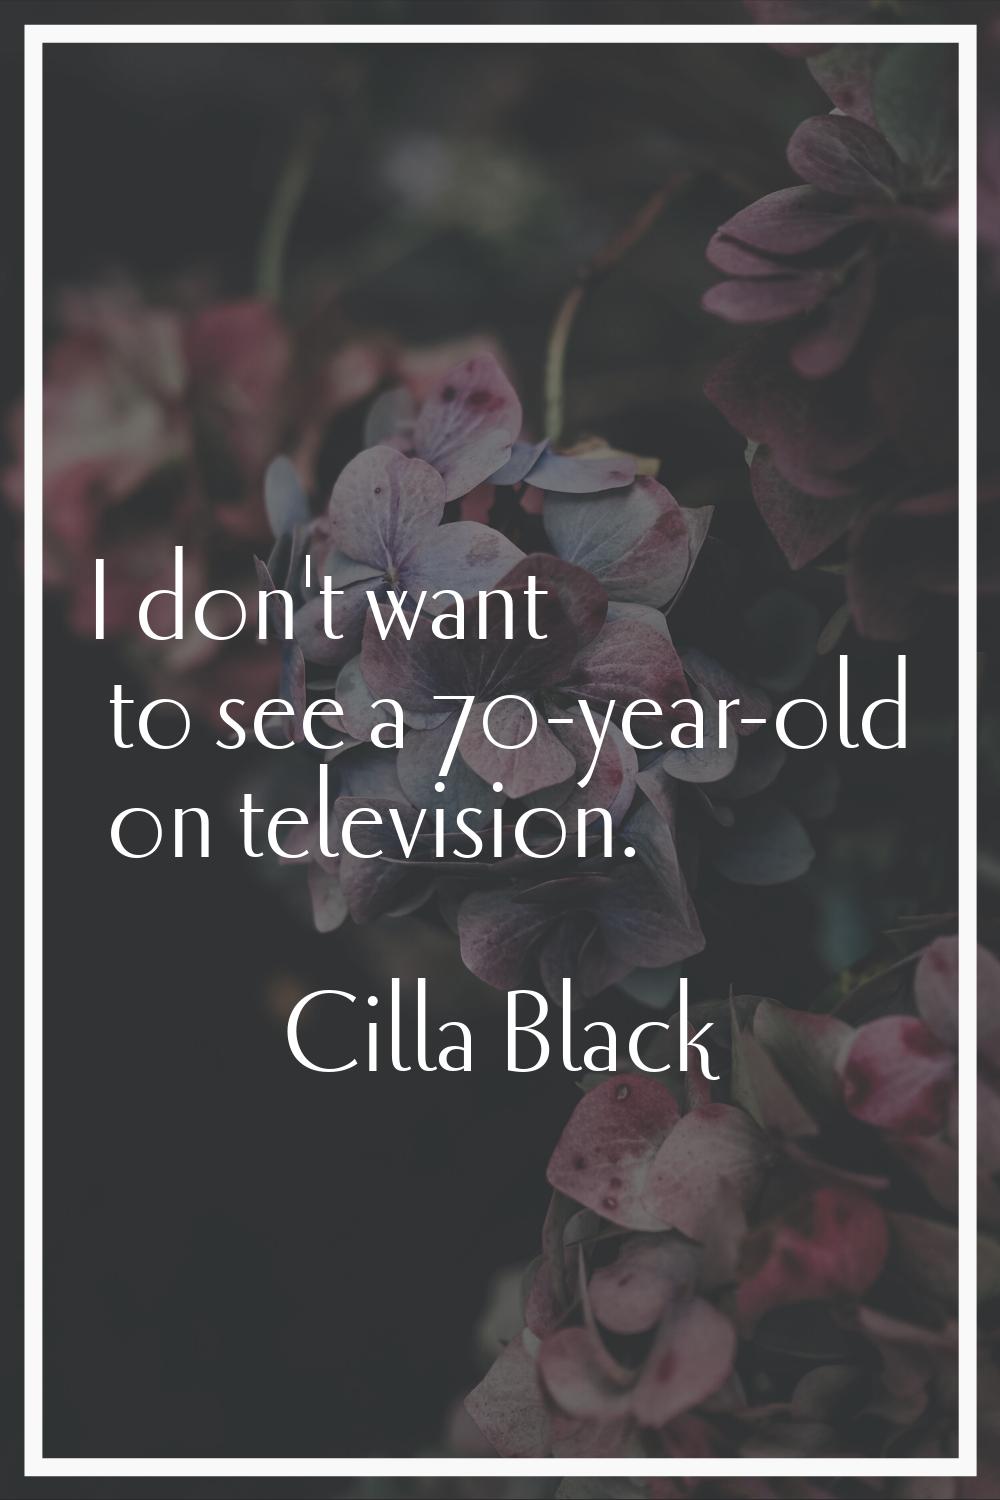 I don't want to see a 70-year-old on television.